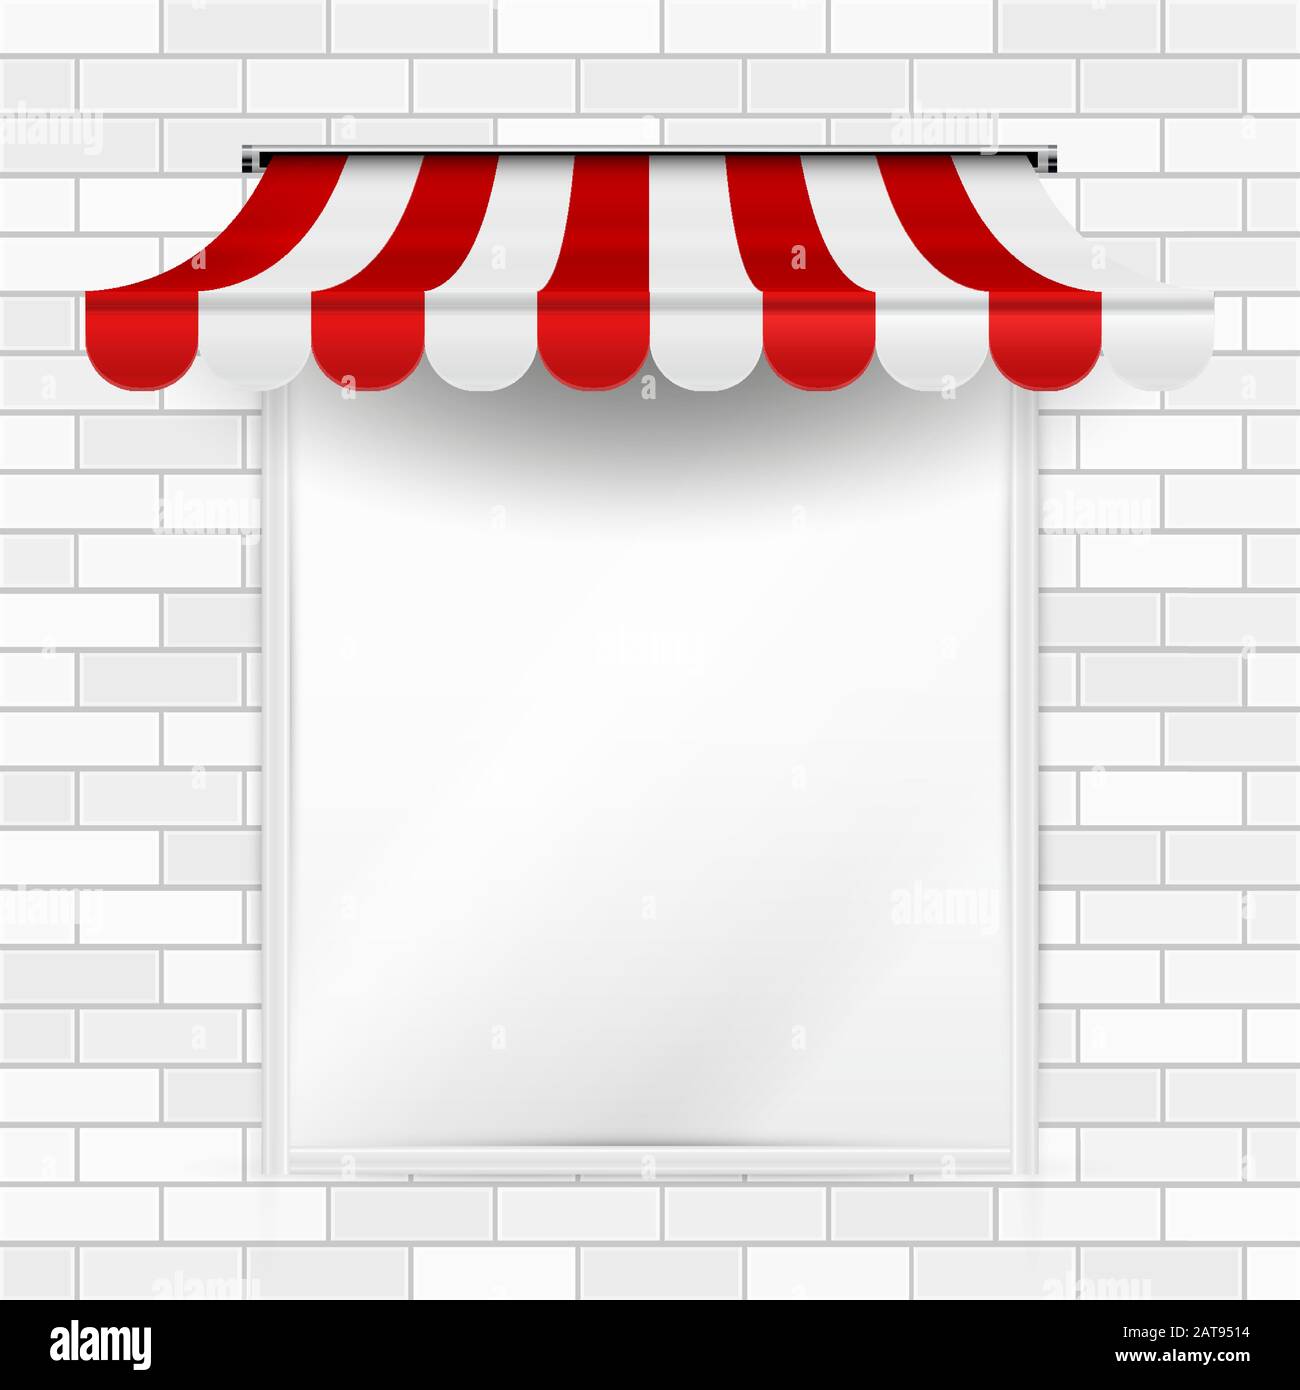 Download Announcement Placard Mockup Commercial Vector Awning Market Cafe Or Restaurant Desing Element Promo Design Template Striped Awning On A White Br Stock Vector Image Art Alamy